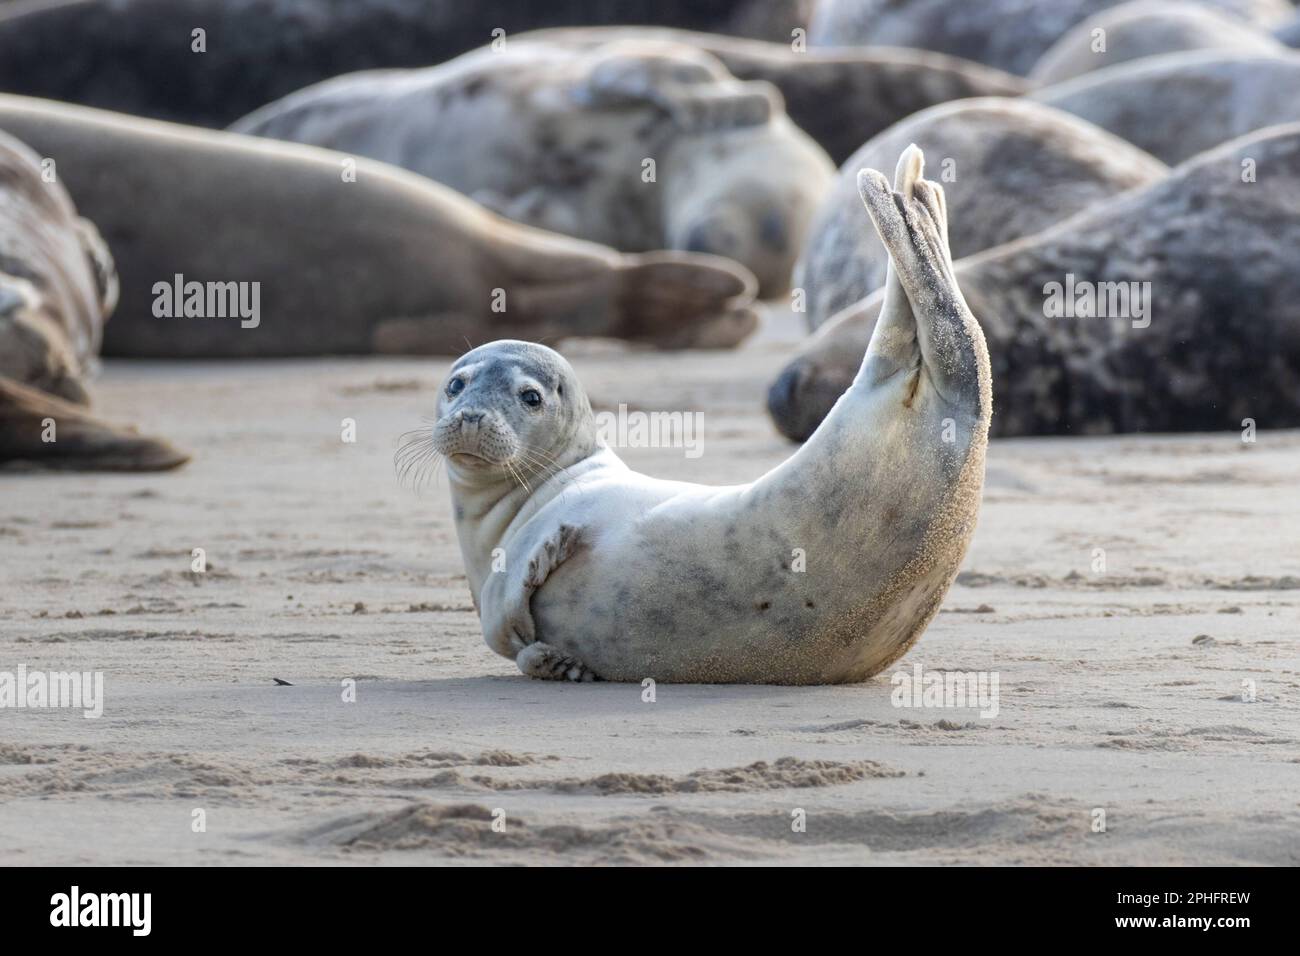 Tail up. Norfolk, UK: THESE COMICAL images show a Norfolk seal pulling funny faces including an impression of Homer Simpson?s famous ?Doh!? gesture wi Stock Photo